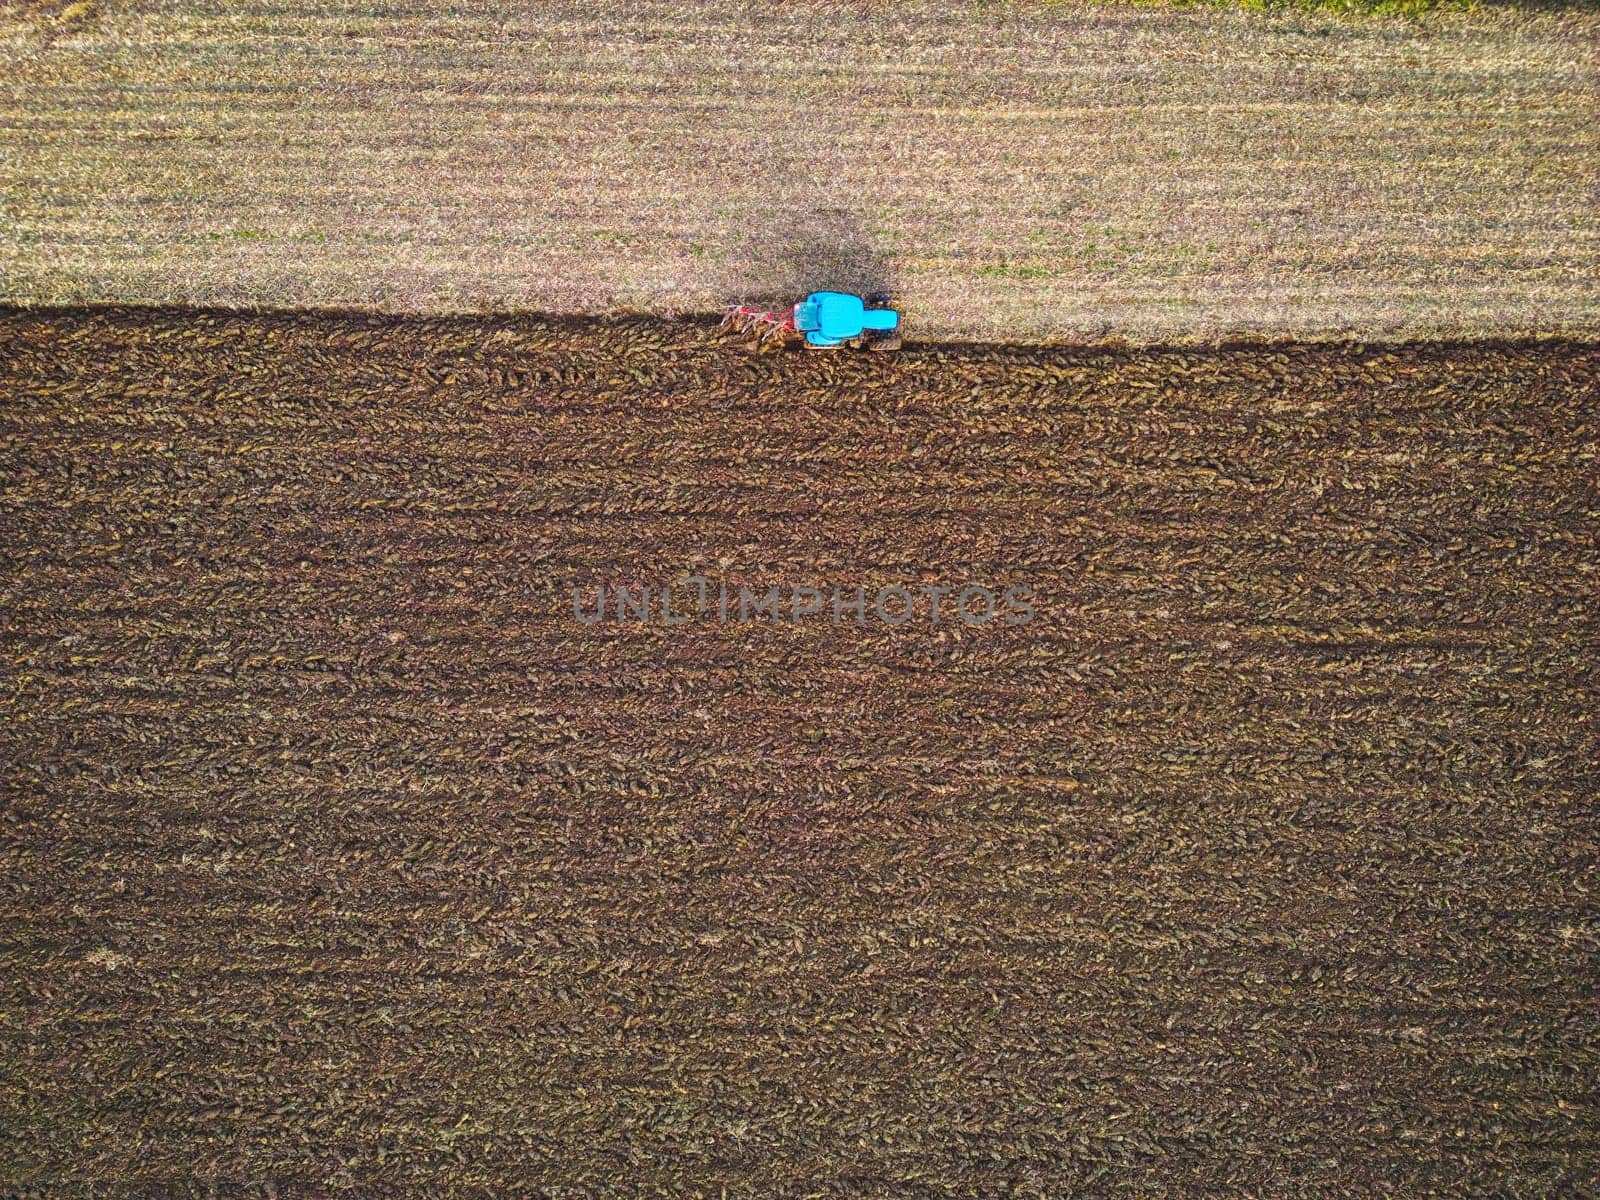 Birdseye view tractor ploughing a field horizontally by VisualProductions